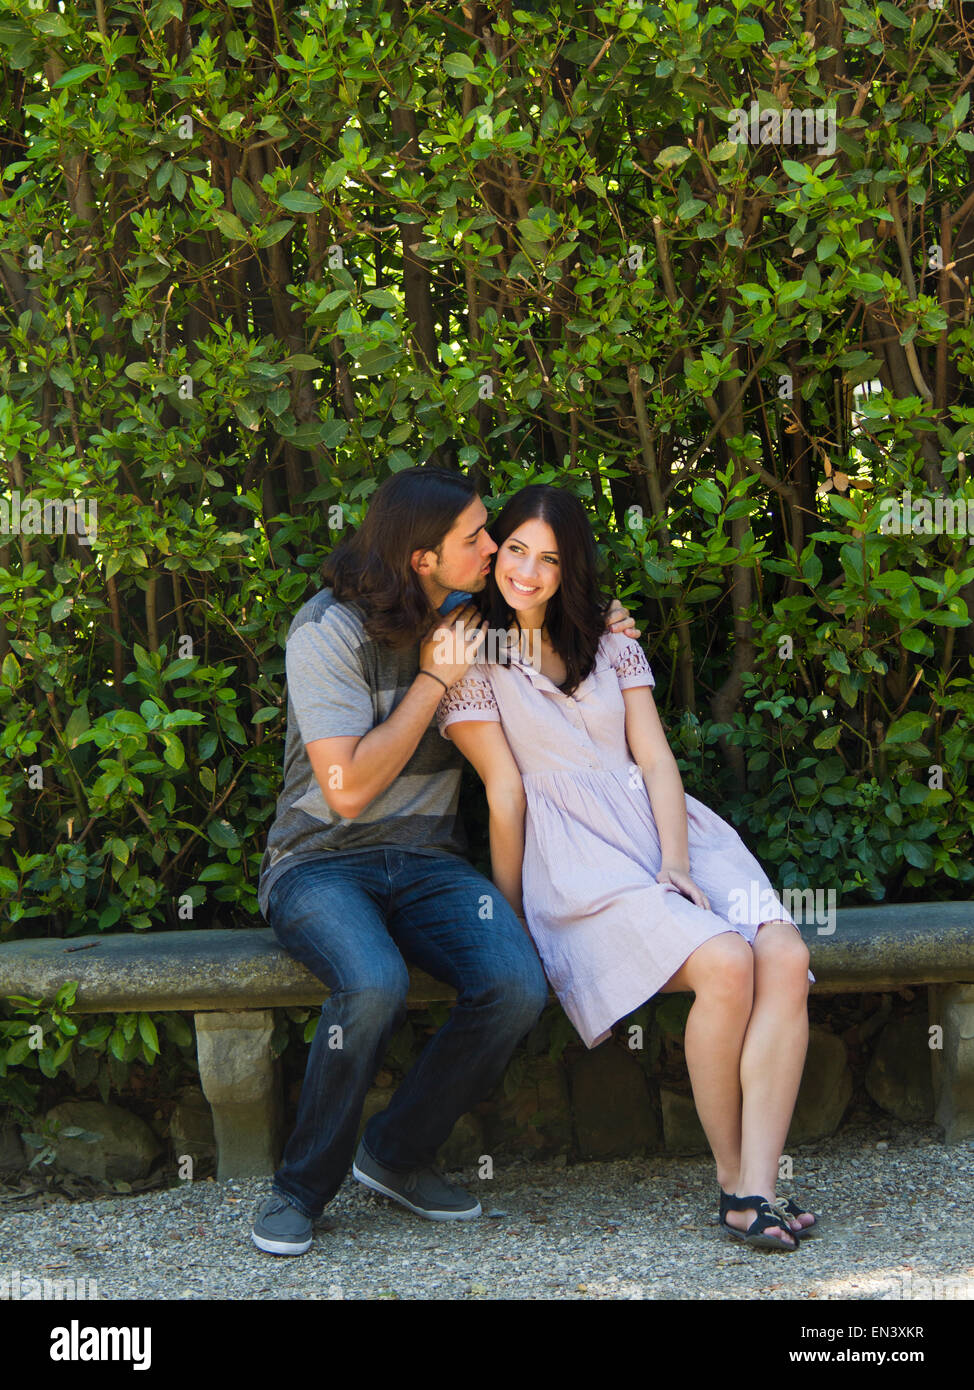 Italy, Florence, Affectionate young couple sitting on bench Stock Photo